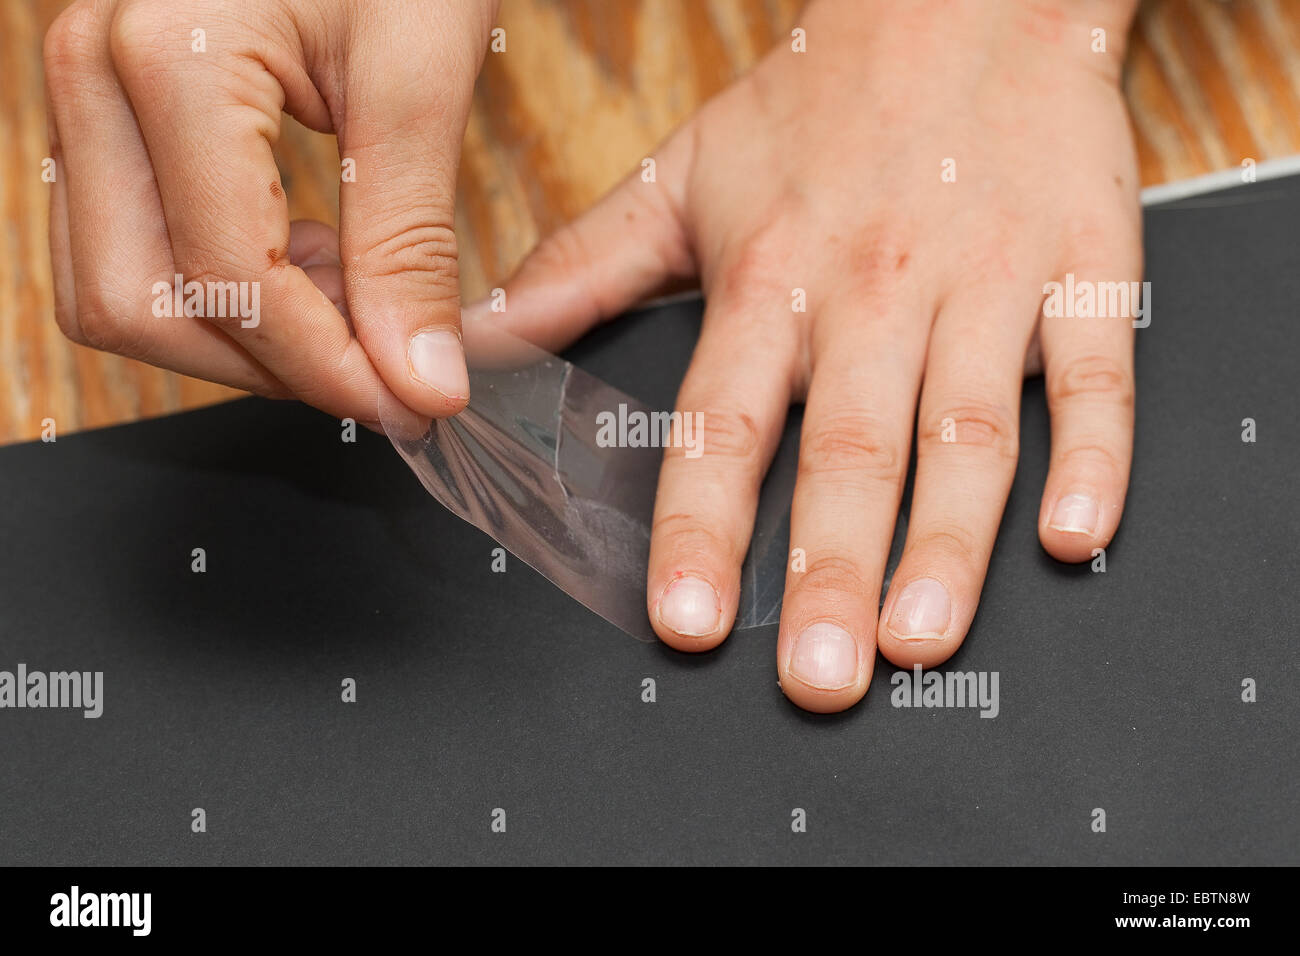 taking fingerprints. Step 5: the fingerprint fixed on a transparent cellotape is sticked on a black board Stock Photo